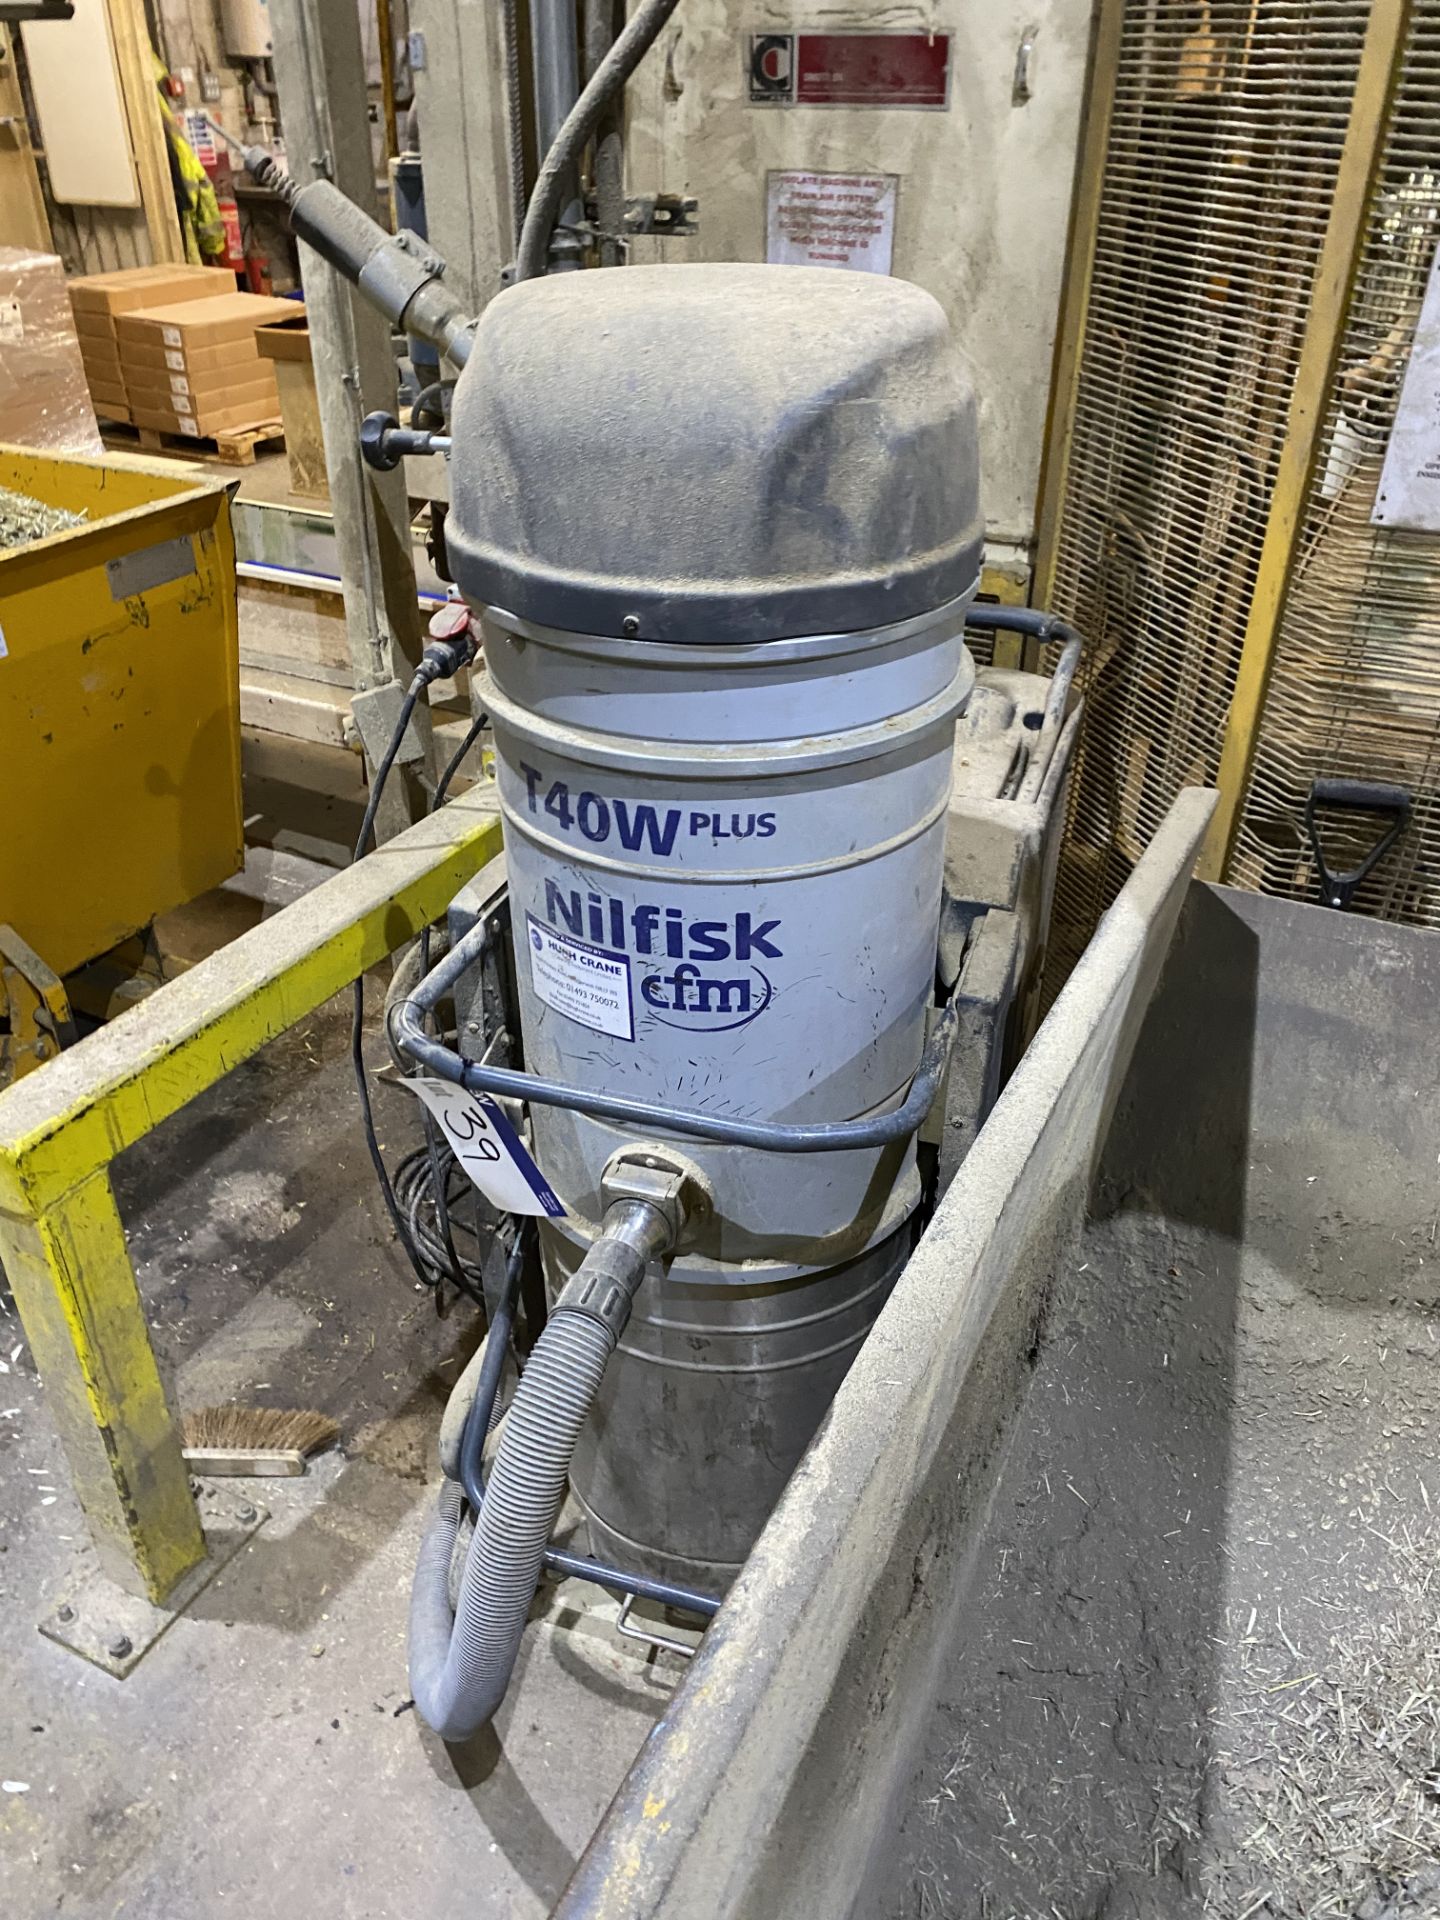 Nilfisk CFM T40W Plus MOBILE CENTRAL VACUUM UNIT, serial no. 3820150500112, with steel central - Image 2 of 4